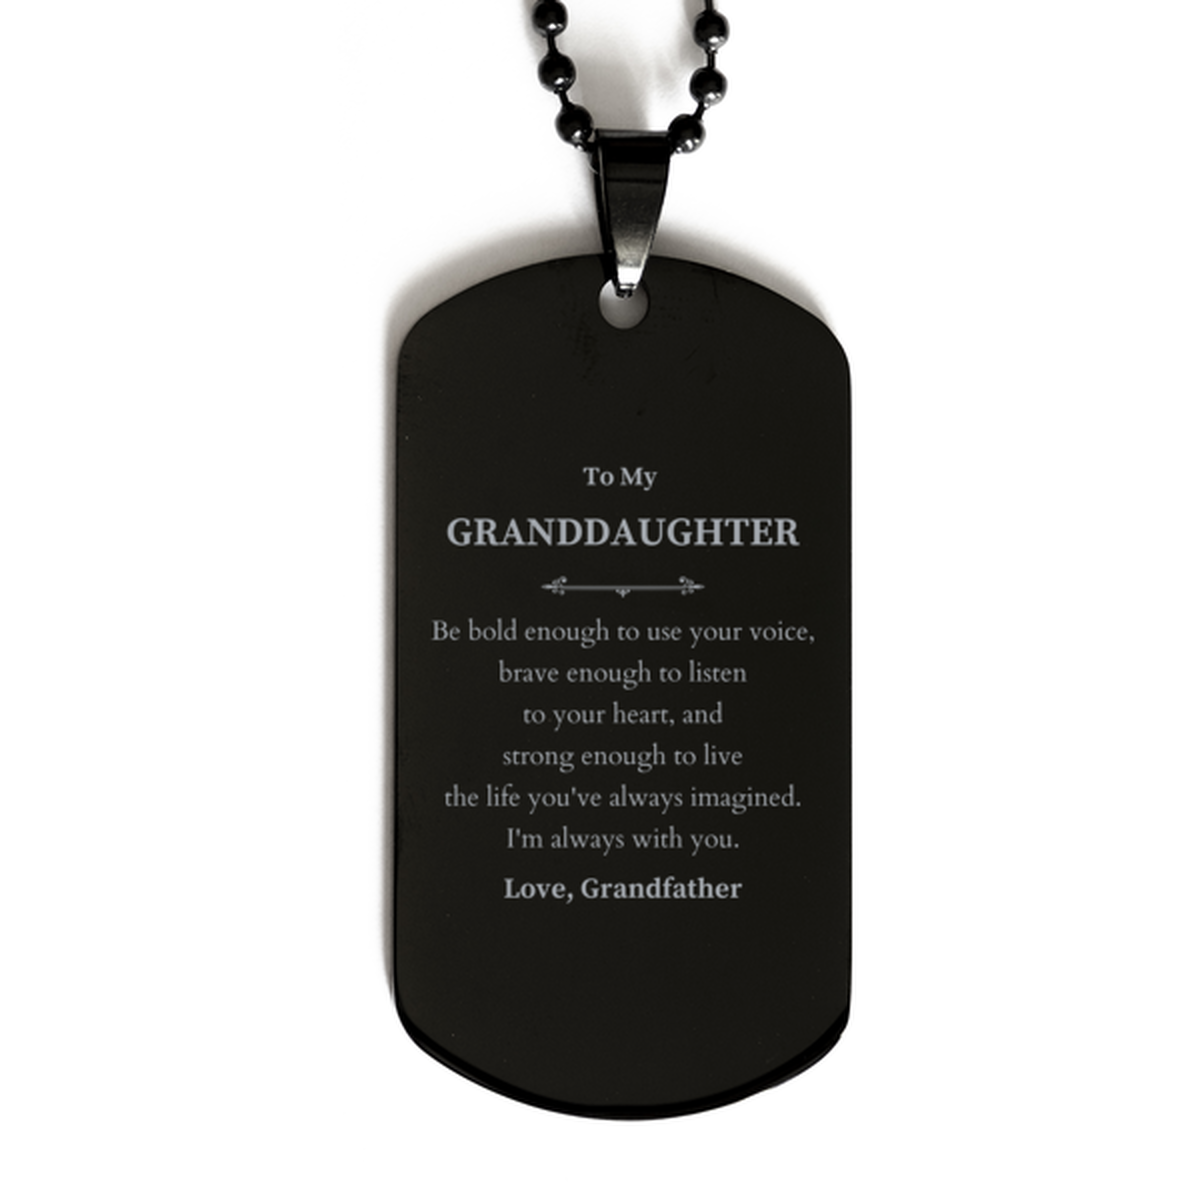 Keepsake Granddaughter Black Dog Tag Gift Idea Graduation Christmas Birthday Granddaughter from Grandfather, Granddaughter Be bold enough to use your voice, brave enough to listen to your heart. Love, Grandfather